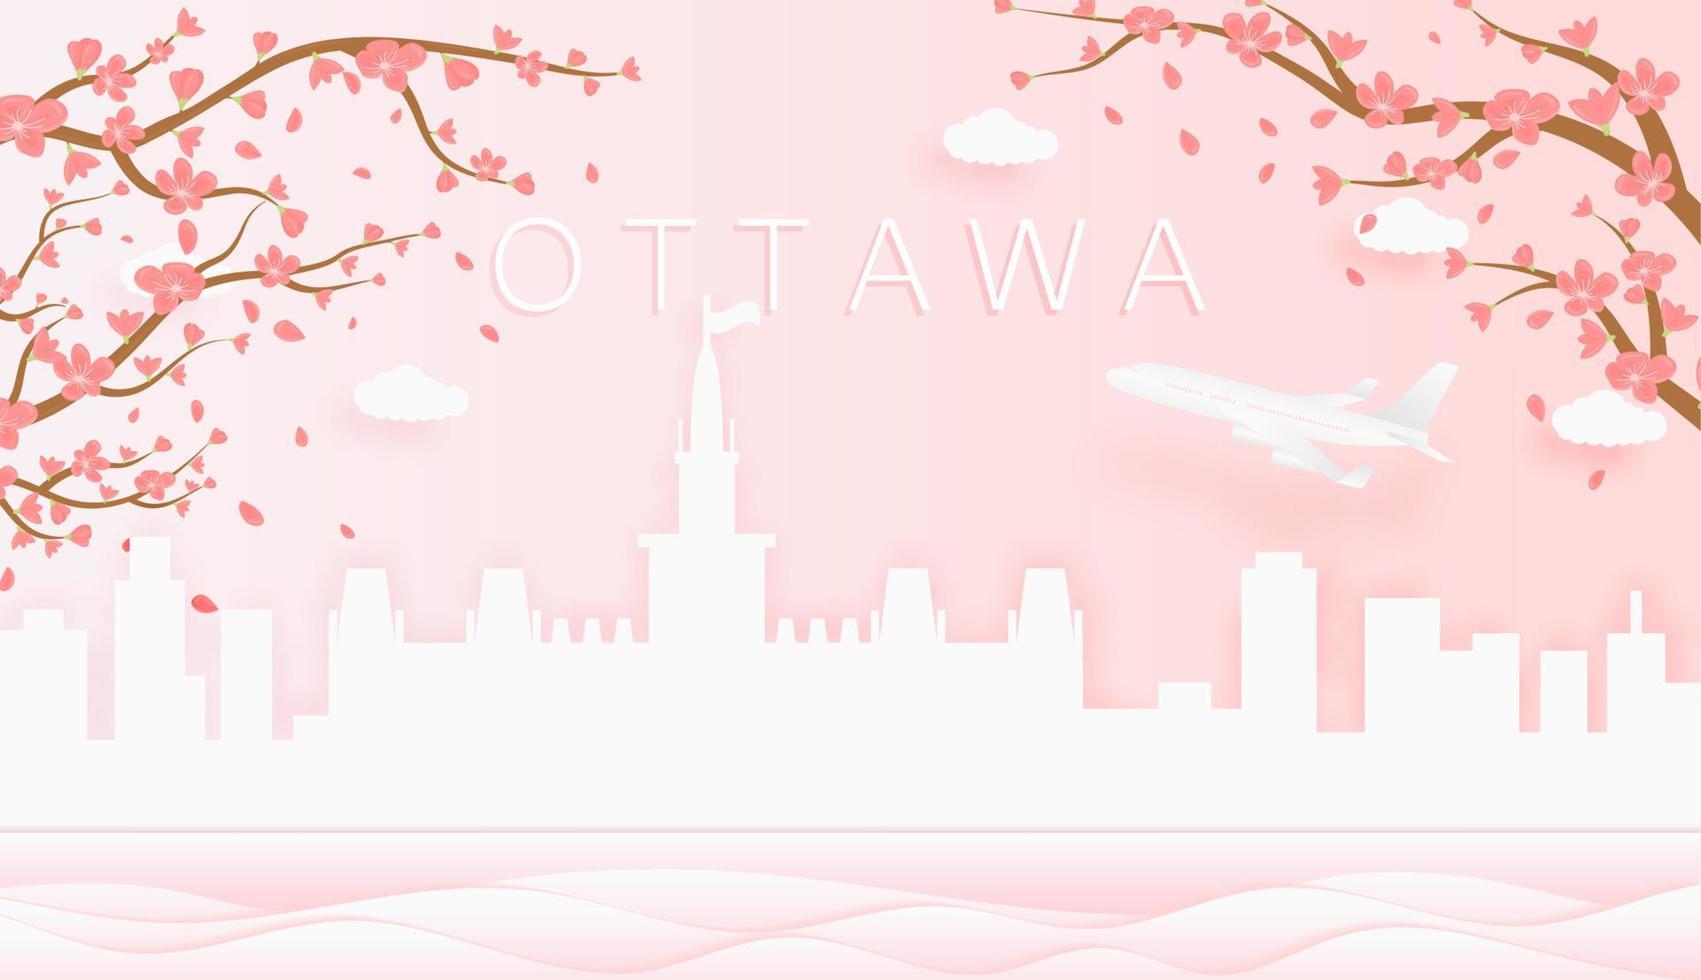 Panorama travel postcard, poster, tour advertising of world famous landmarks of Ottawa, spring season with blooming flowers in tree vector